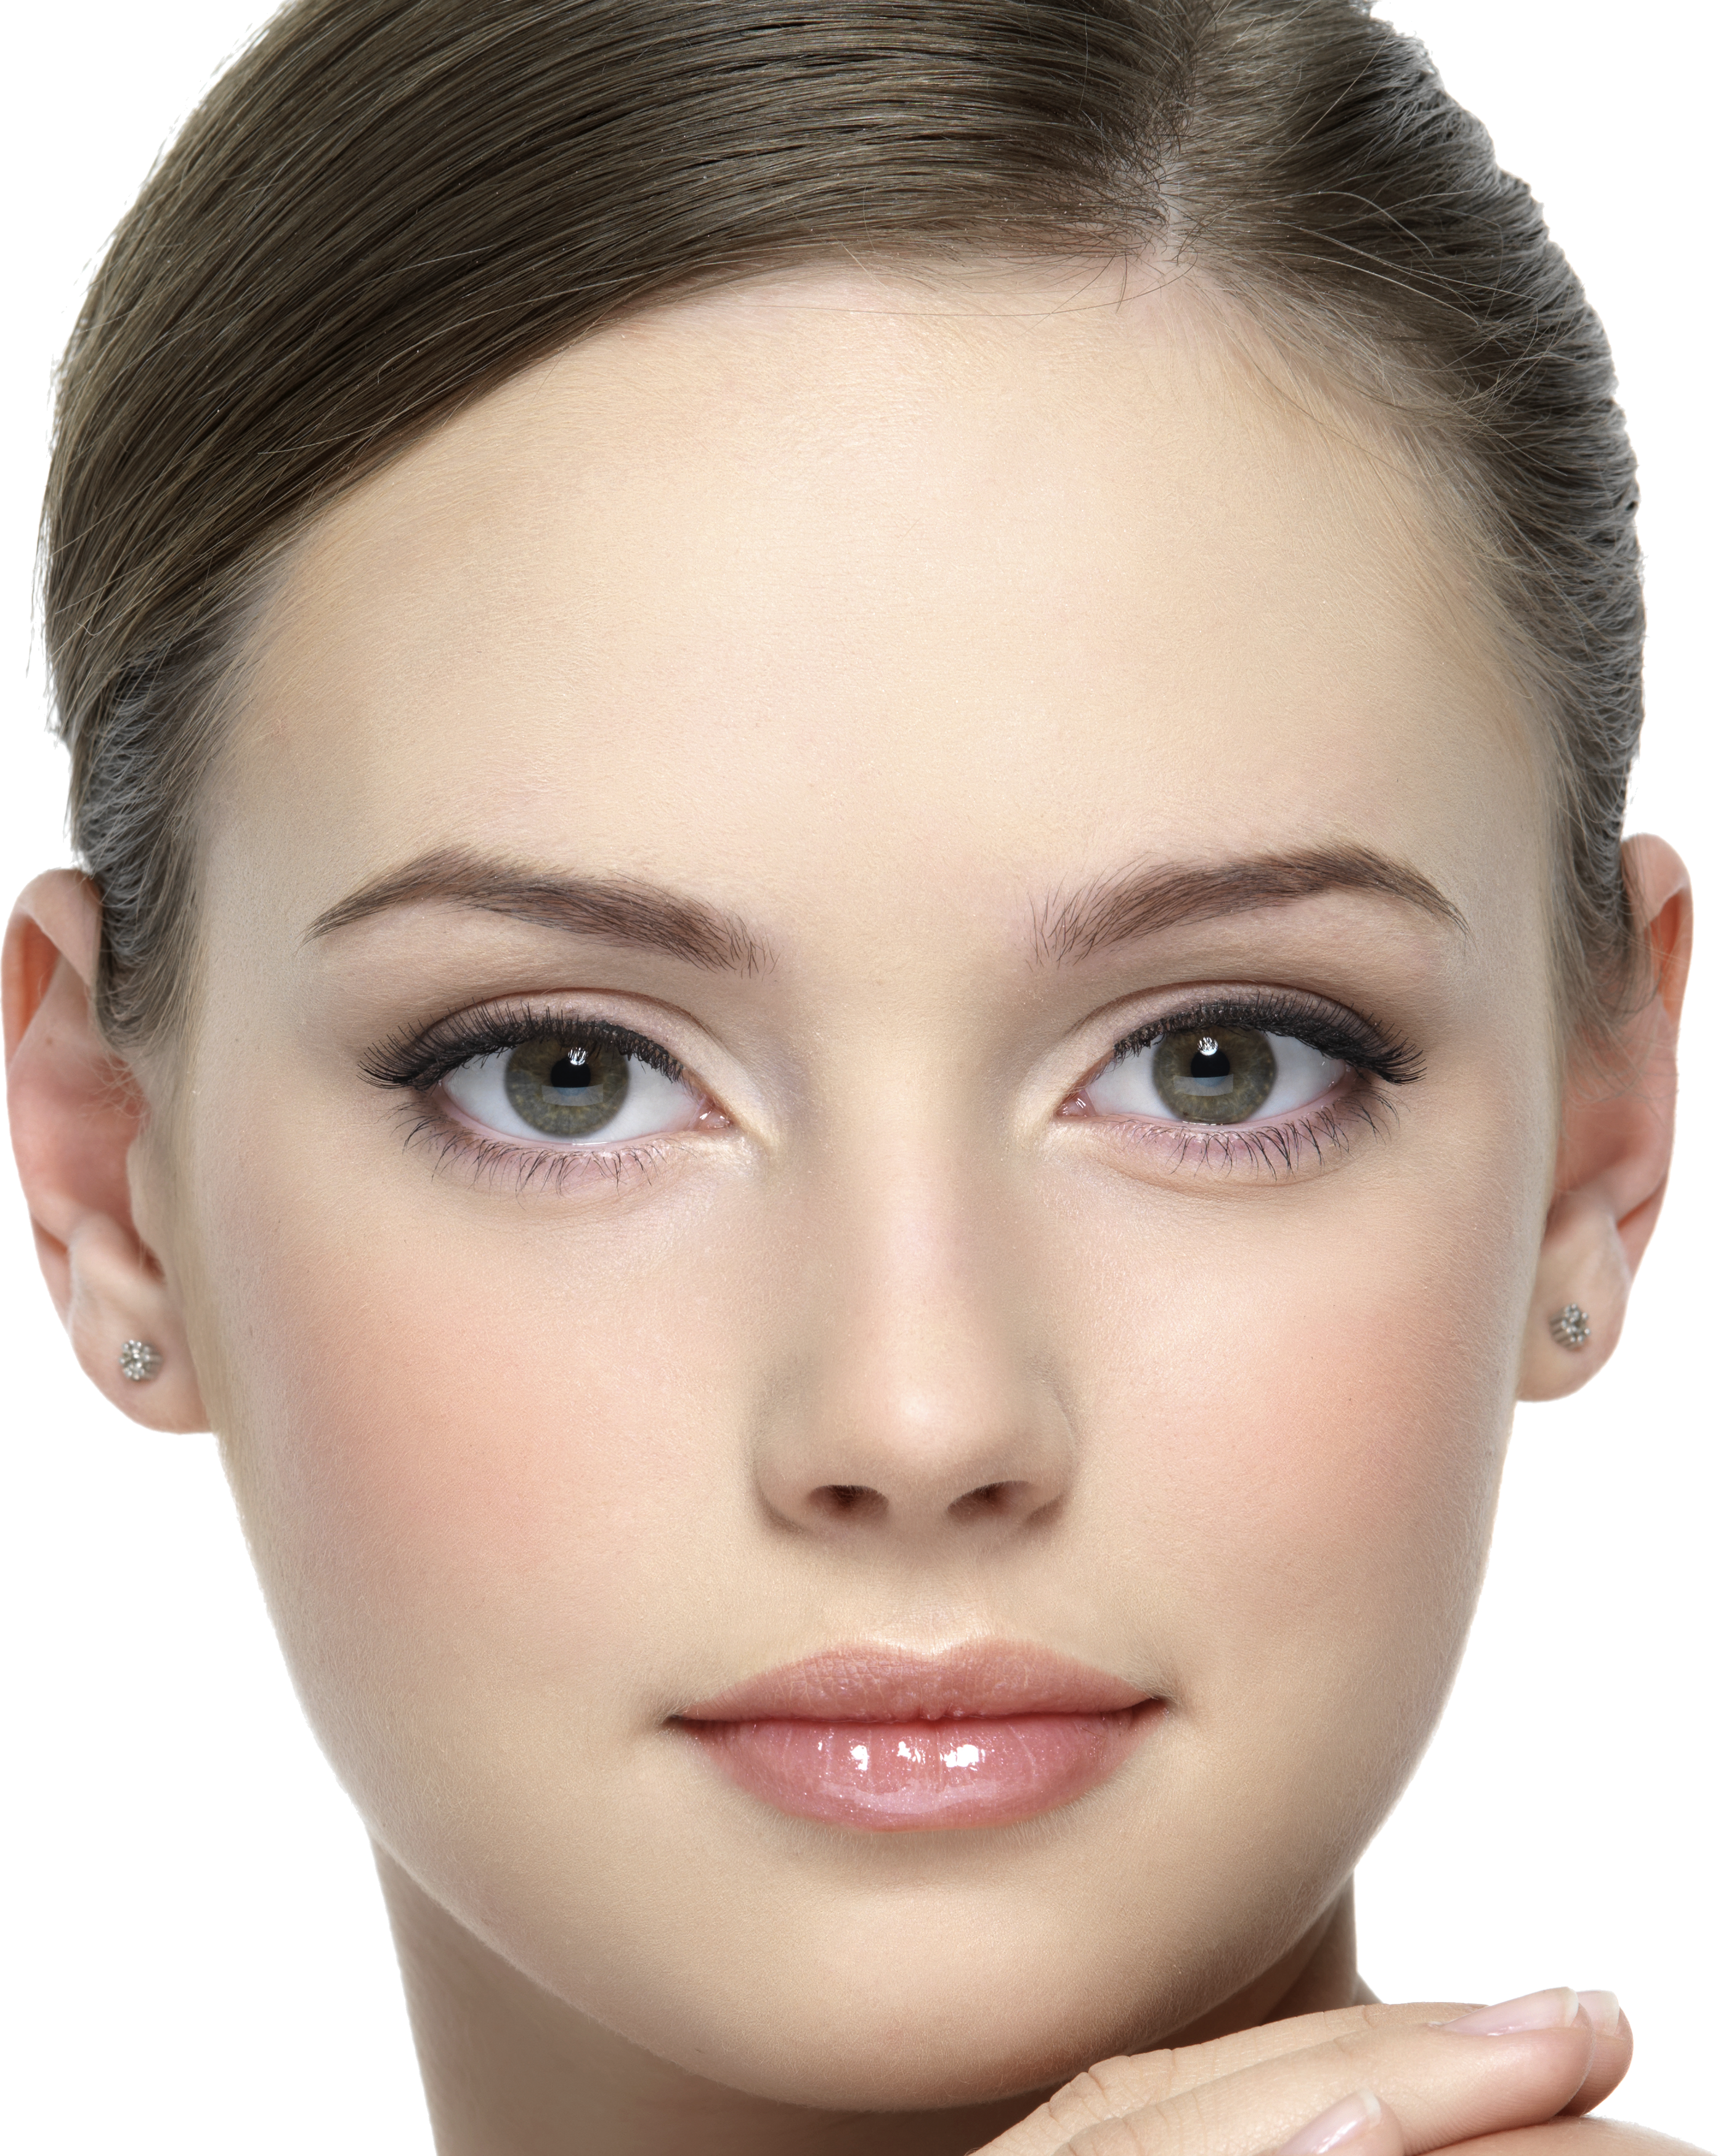 Woman face PNG image